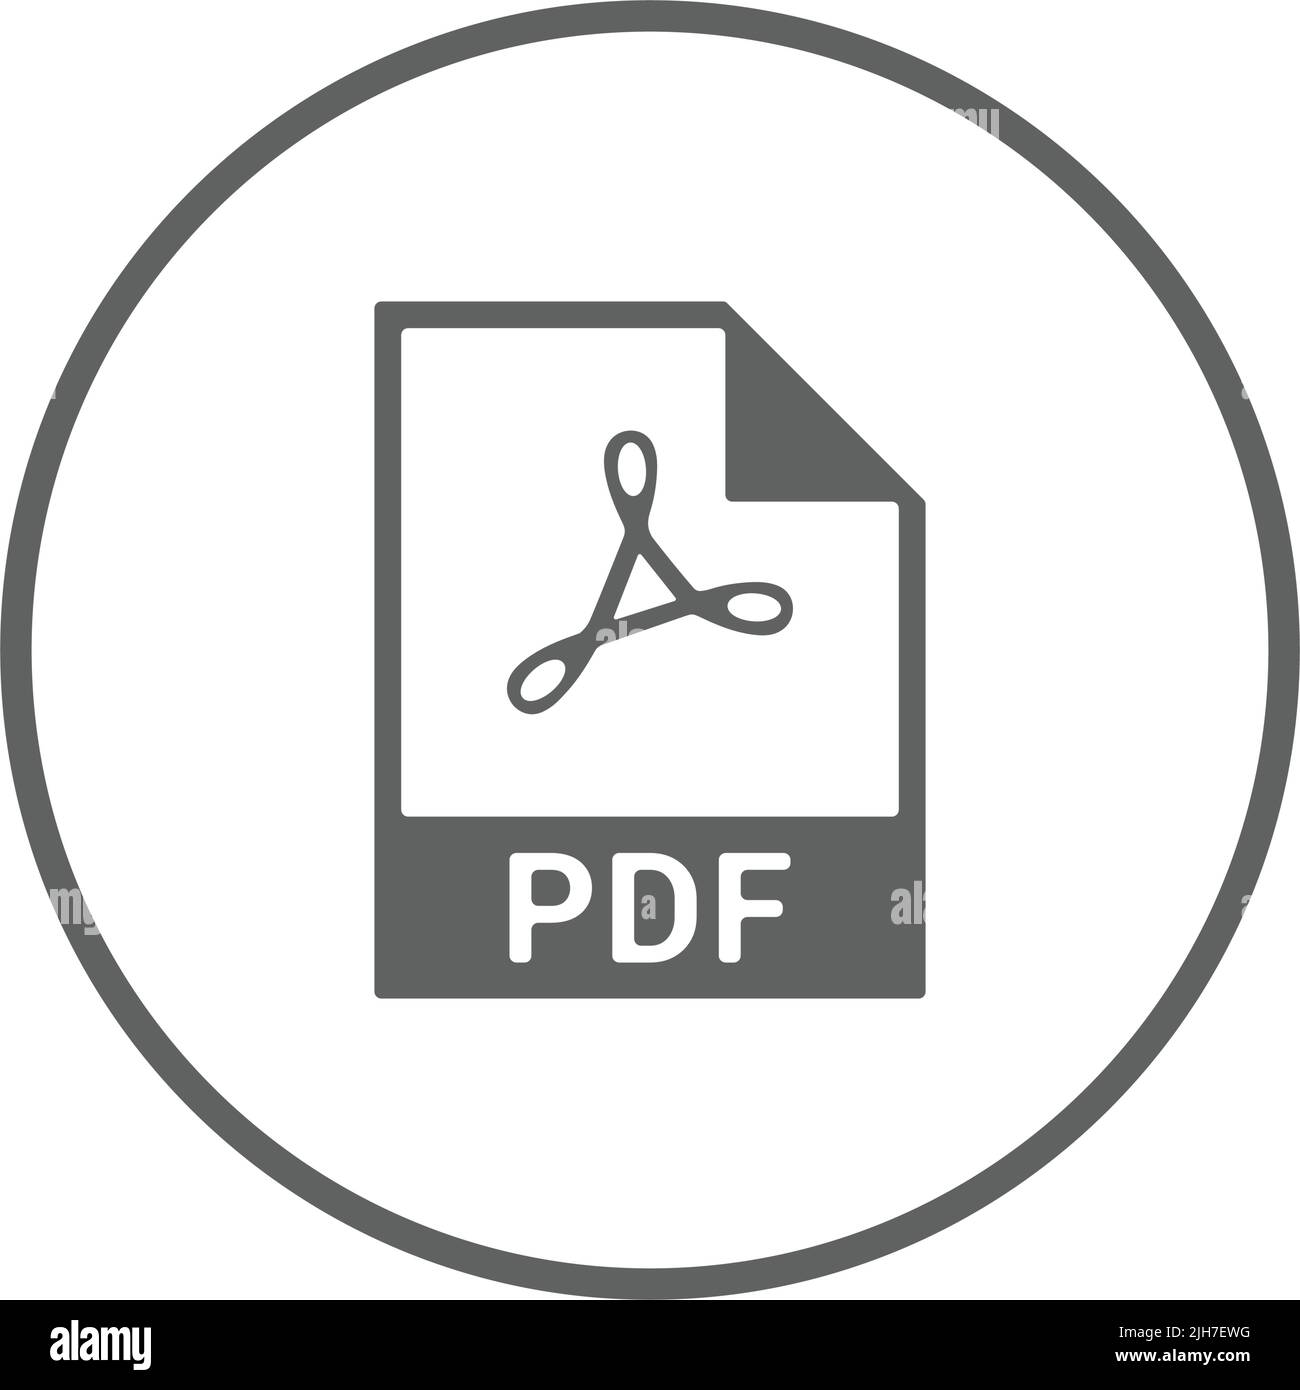 Digital, file, format, pdf icon - Vector EPS file. Perfect use for print media, web, stock images, commercial use or any kind of design project. Stock Vector